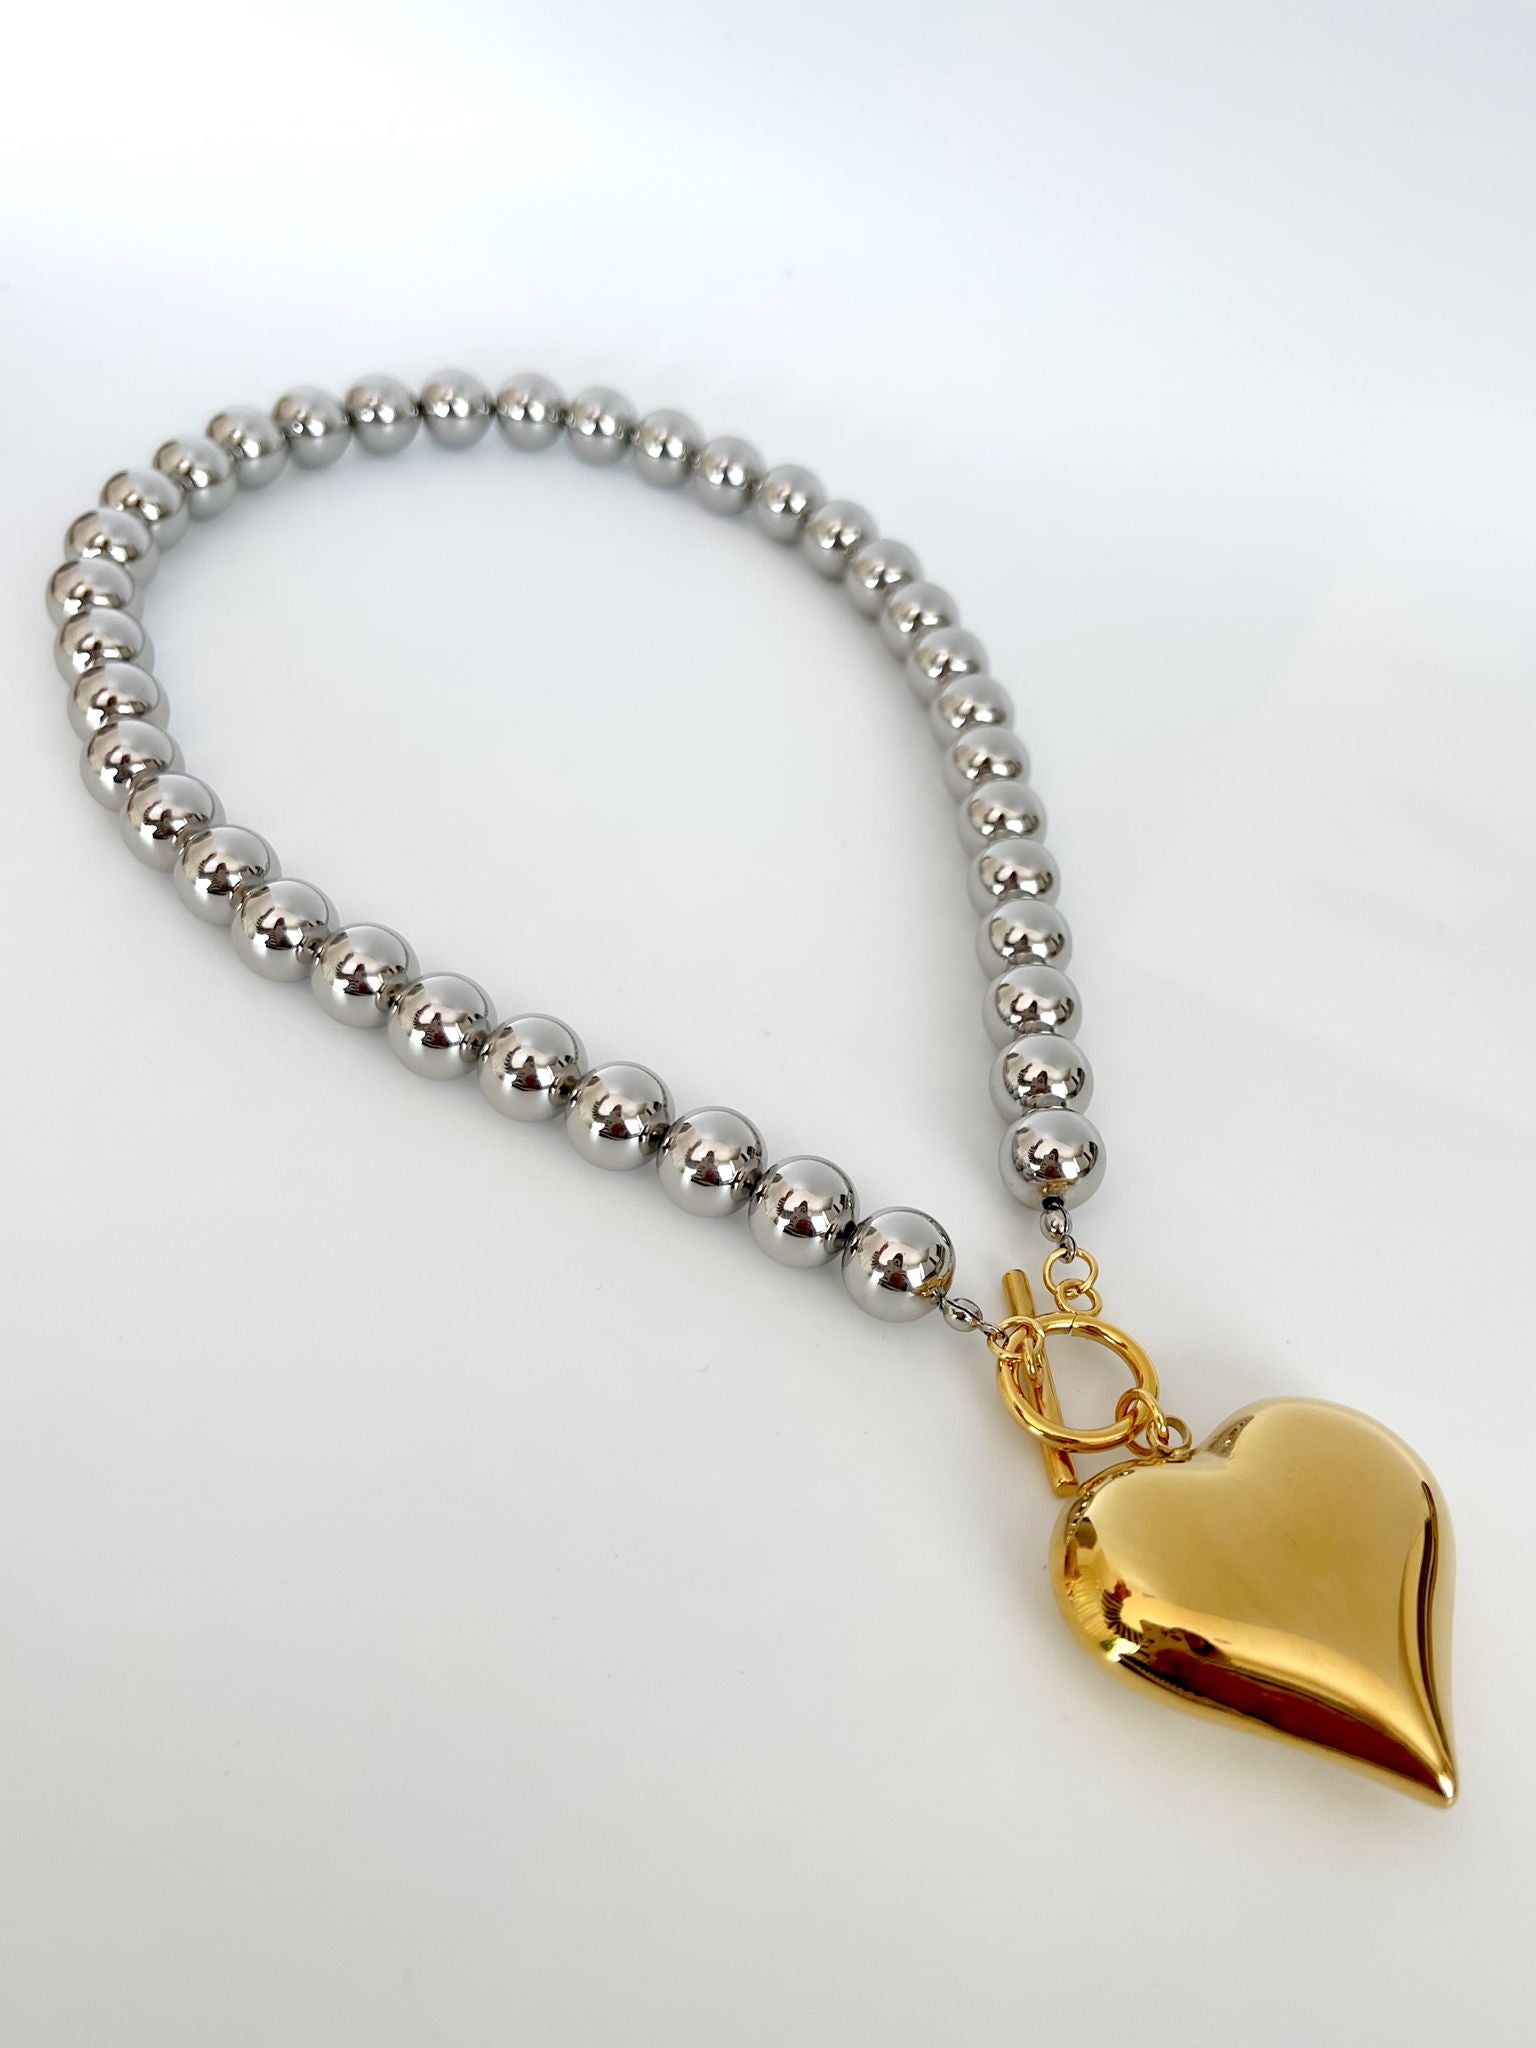 Gold & silver heart necklace